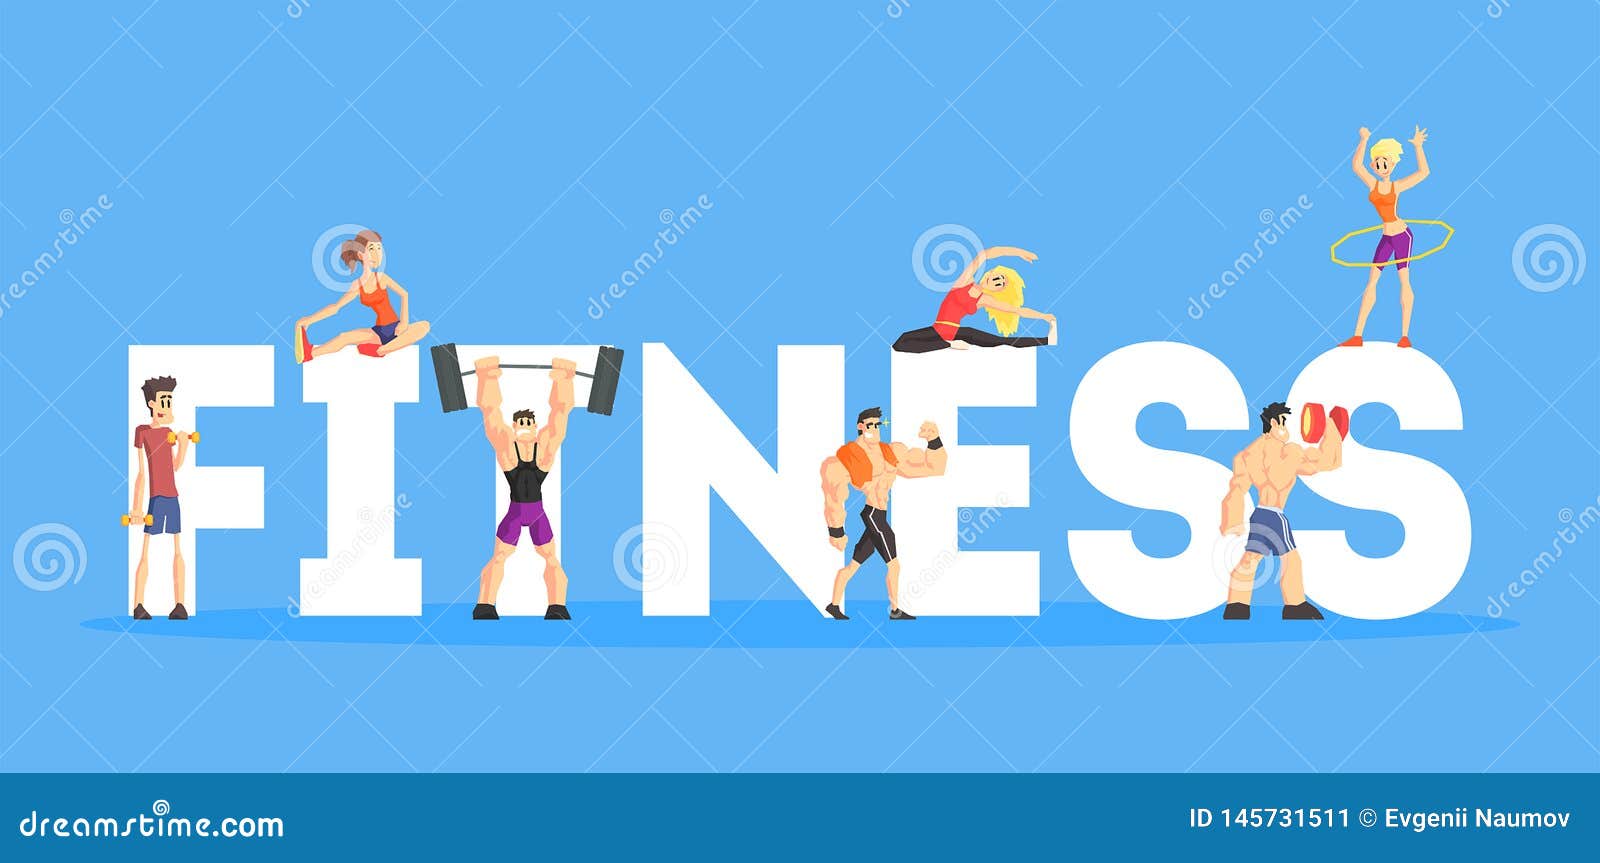 Fitness Banner Template People Doing Diversity Exercises Design Element Can Be Used For Landing Page Mobile App Stock Vector Illustration Of Achievement Exercises